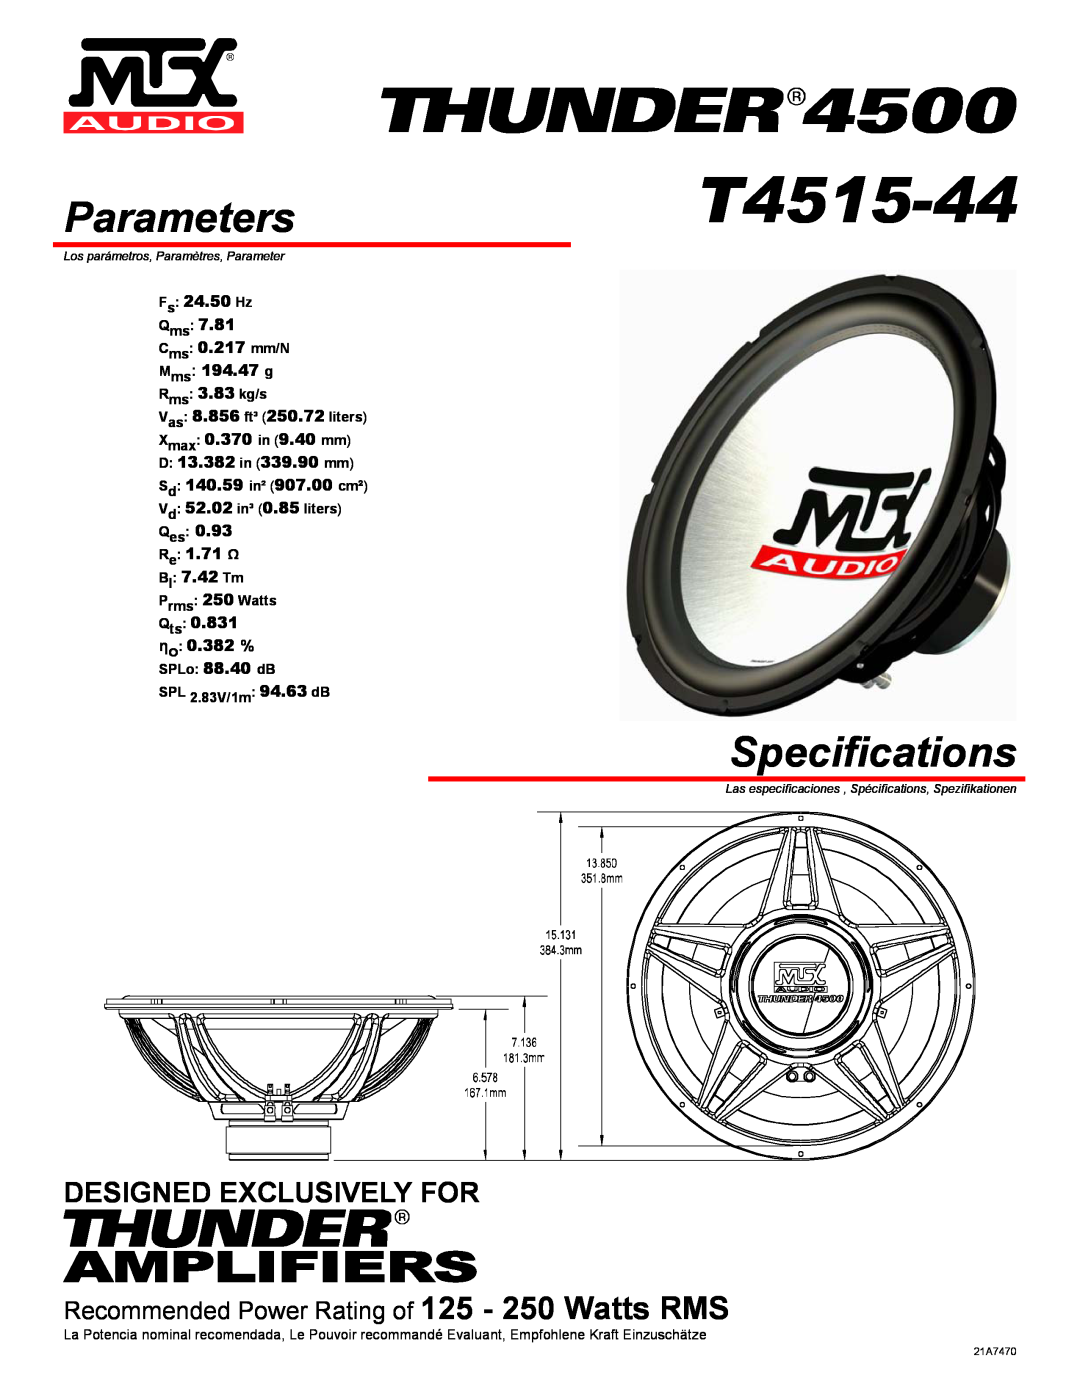 MTX Audio T4515-44 specifications Parameters, Specifications, Amplifiers, Designed Exclusively For, Fs 24.50 Hz Qms 